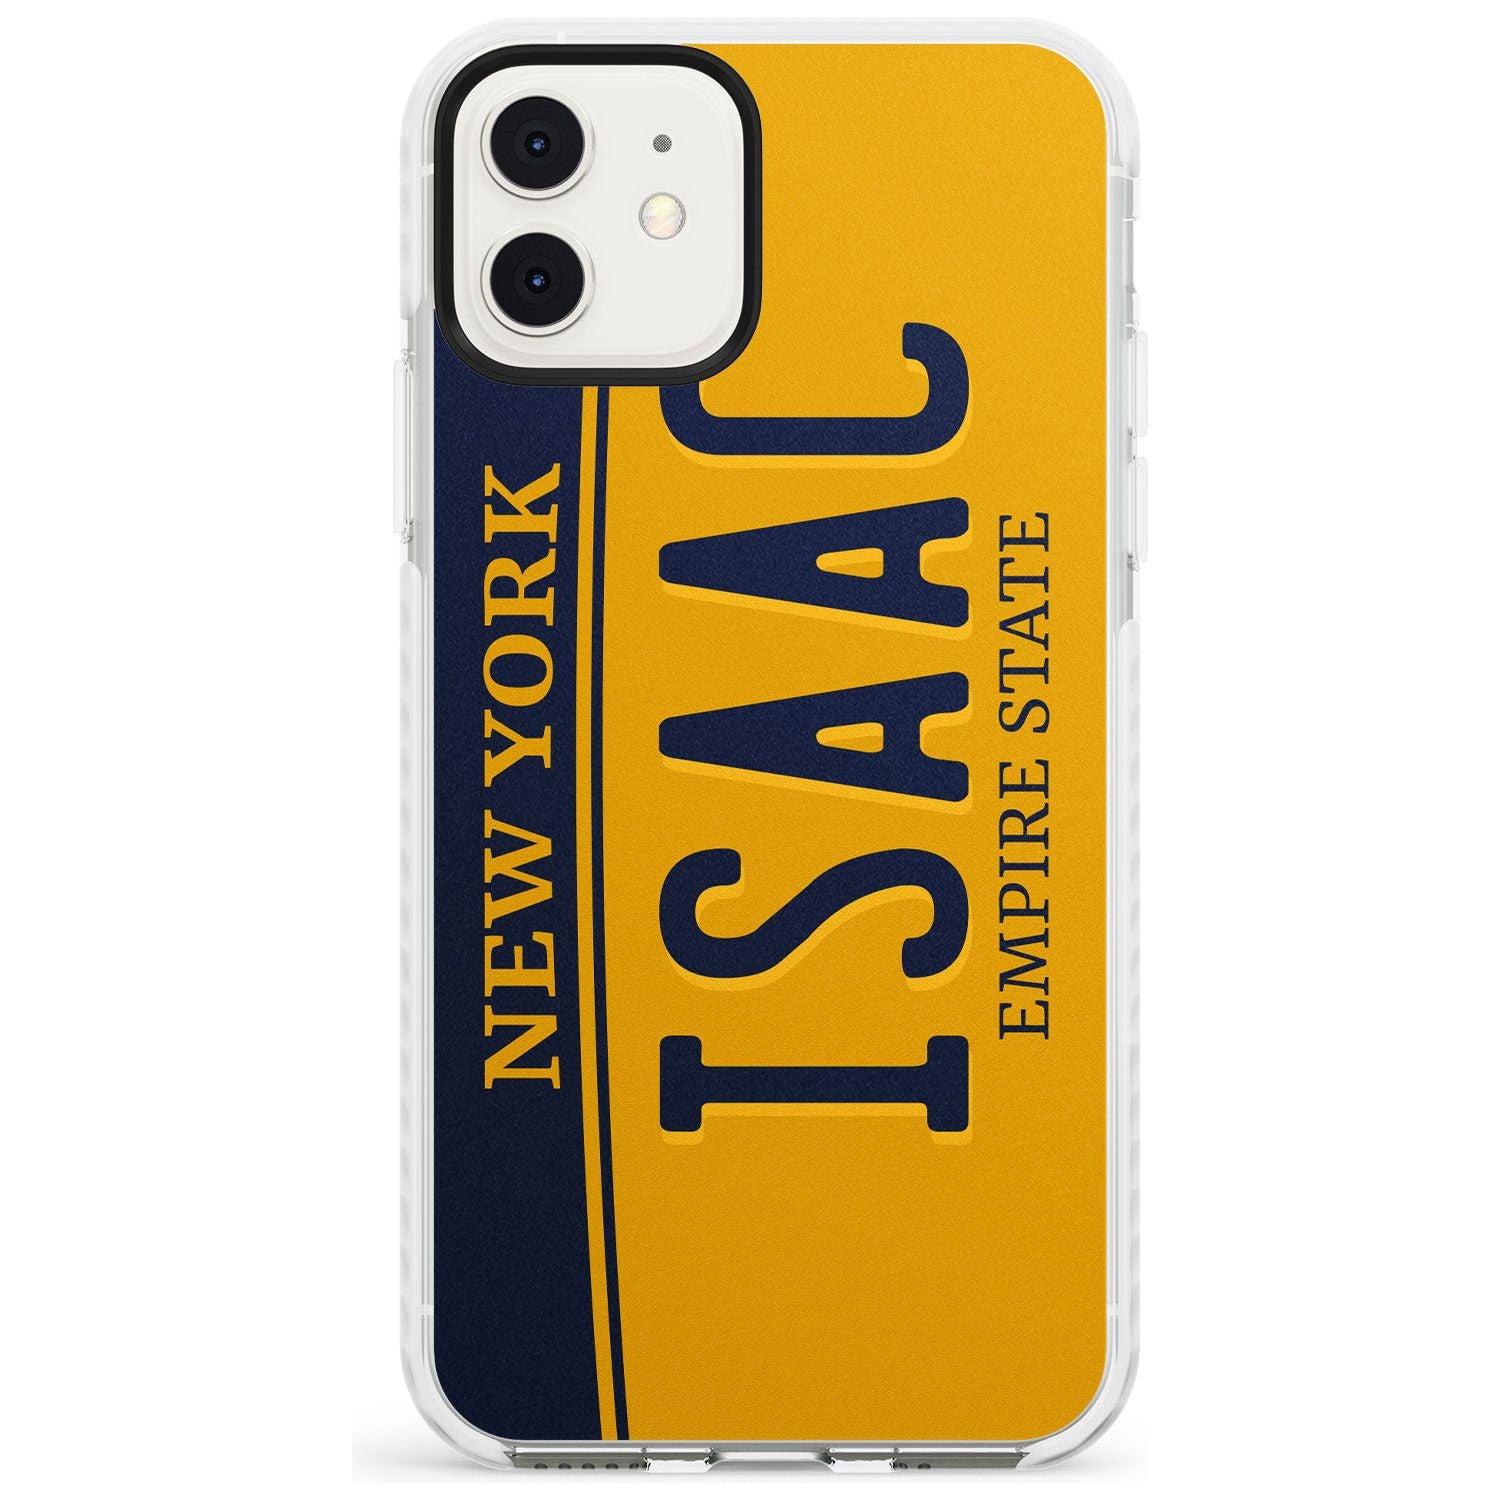 New York License Plate Slim TPU Phone Case for iPhone 11